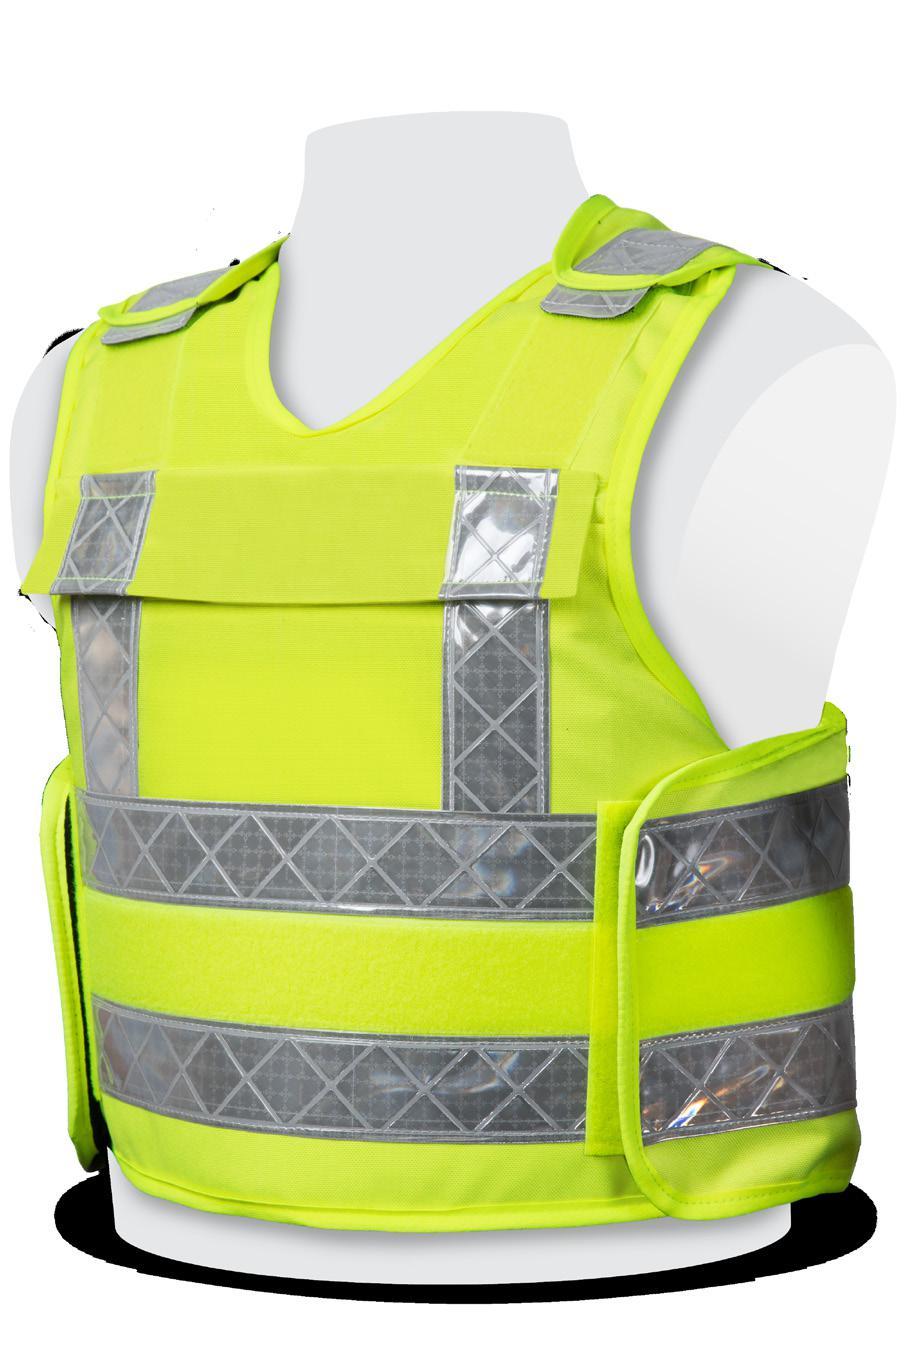 Bullet Resistant Vest - HVV2 Model #: 500121 Protection Level: NIJ Level IIIA+ This outstanding bullet resistant vest has not only passed the most up to date National Institute of Justice Standard